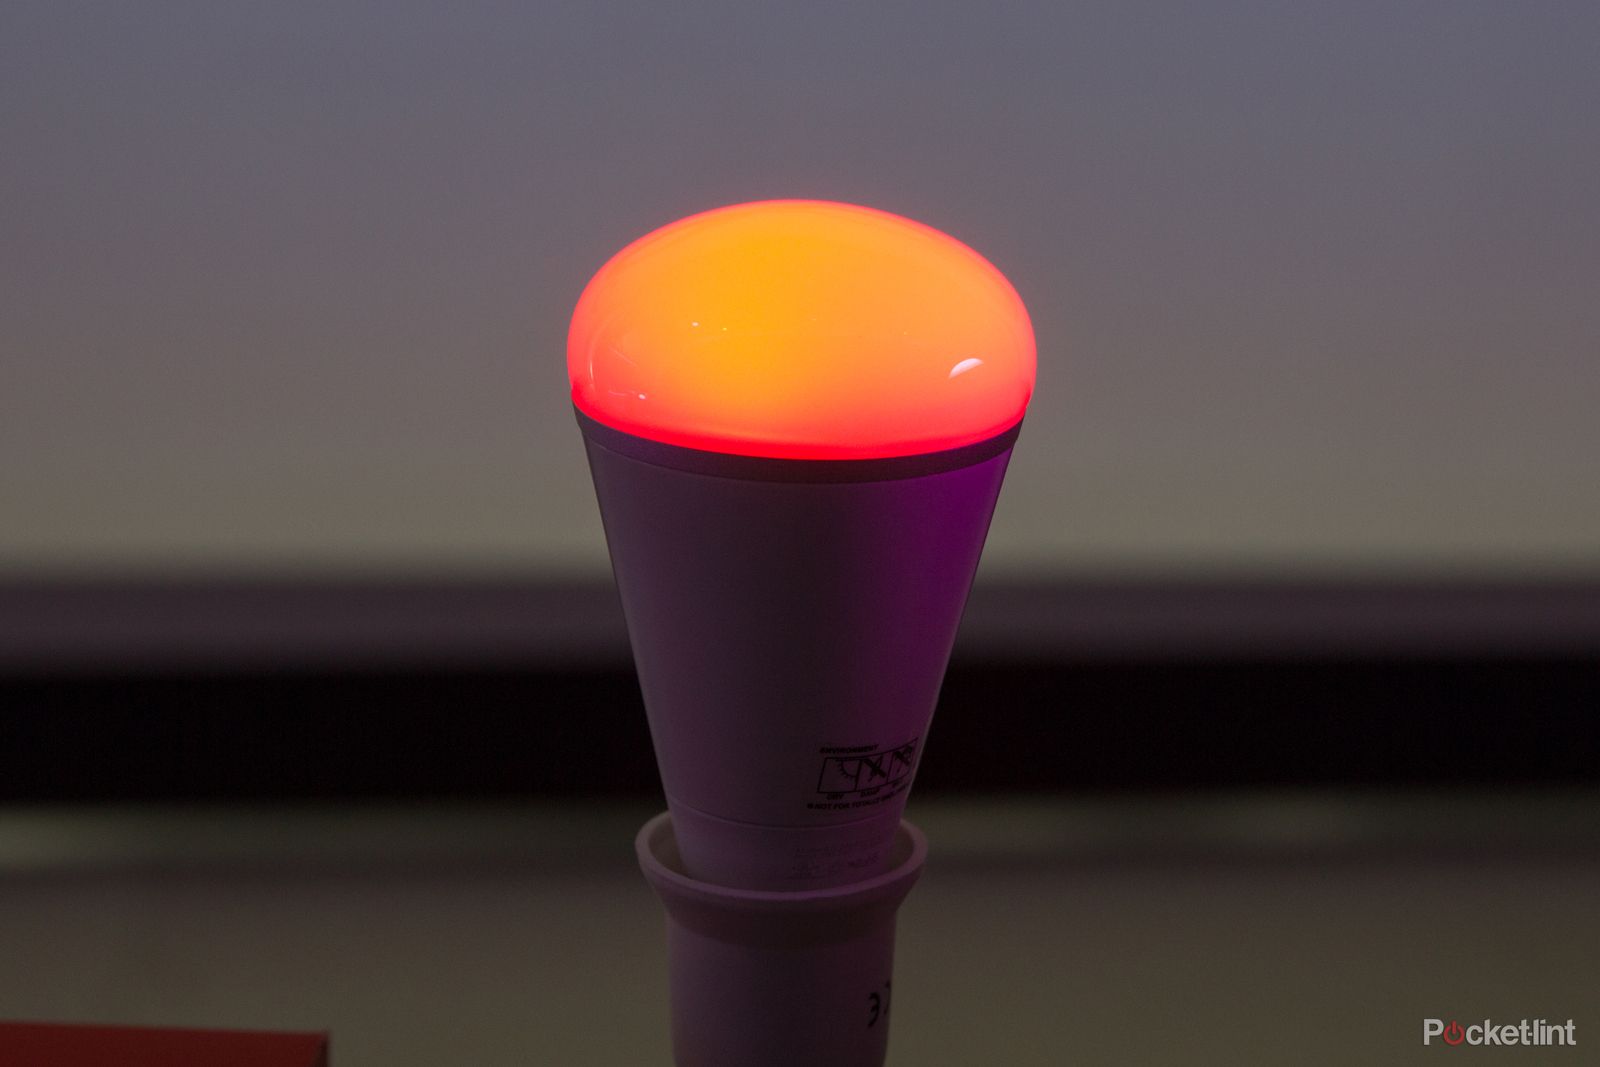 playbulb wants to bring hue like skills to your garden image 3